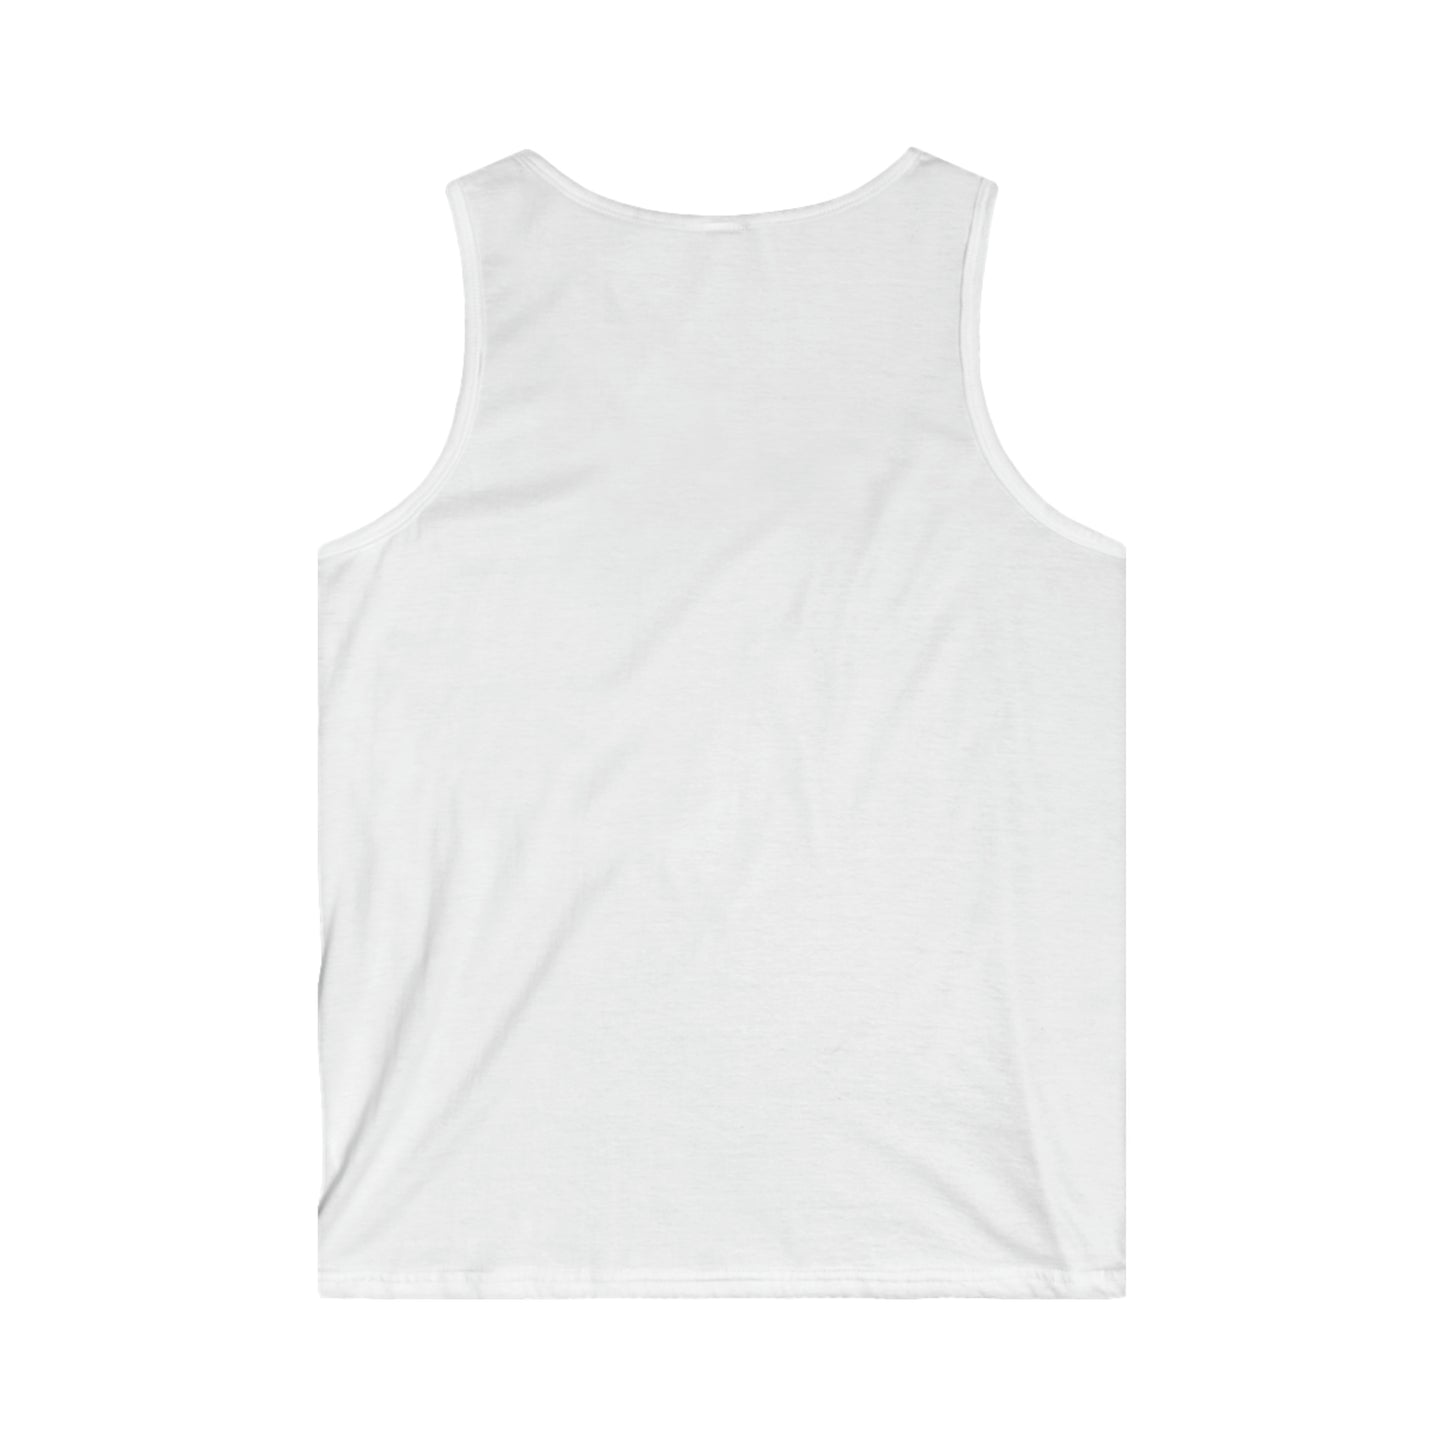 Don't Dream It, Be It Men's Softstyle Tank Top